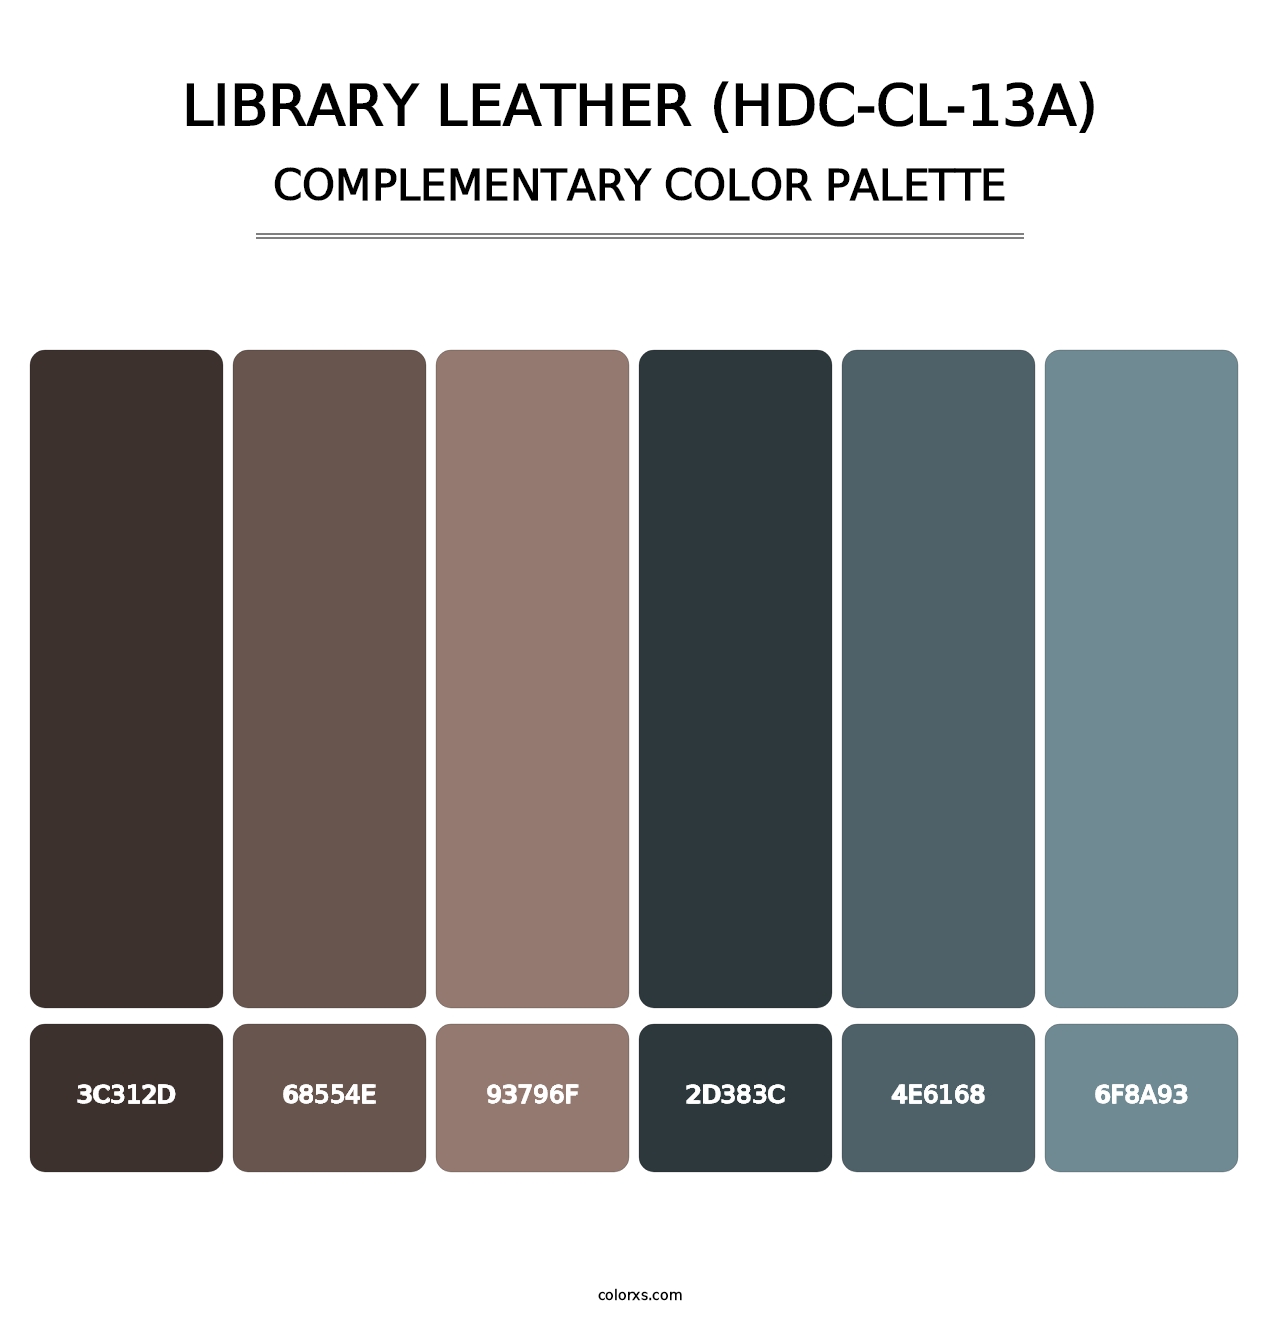 Library Leather (HDC-CL-13A) - Complementary Color Palette